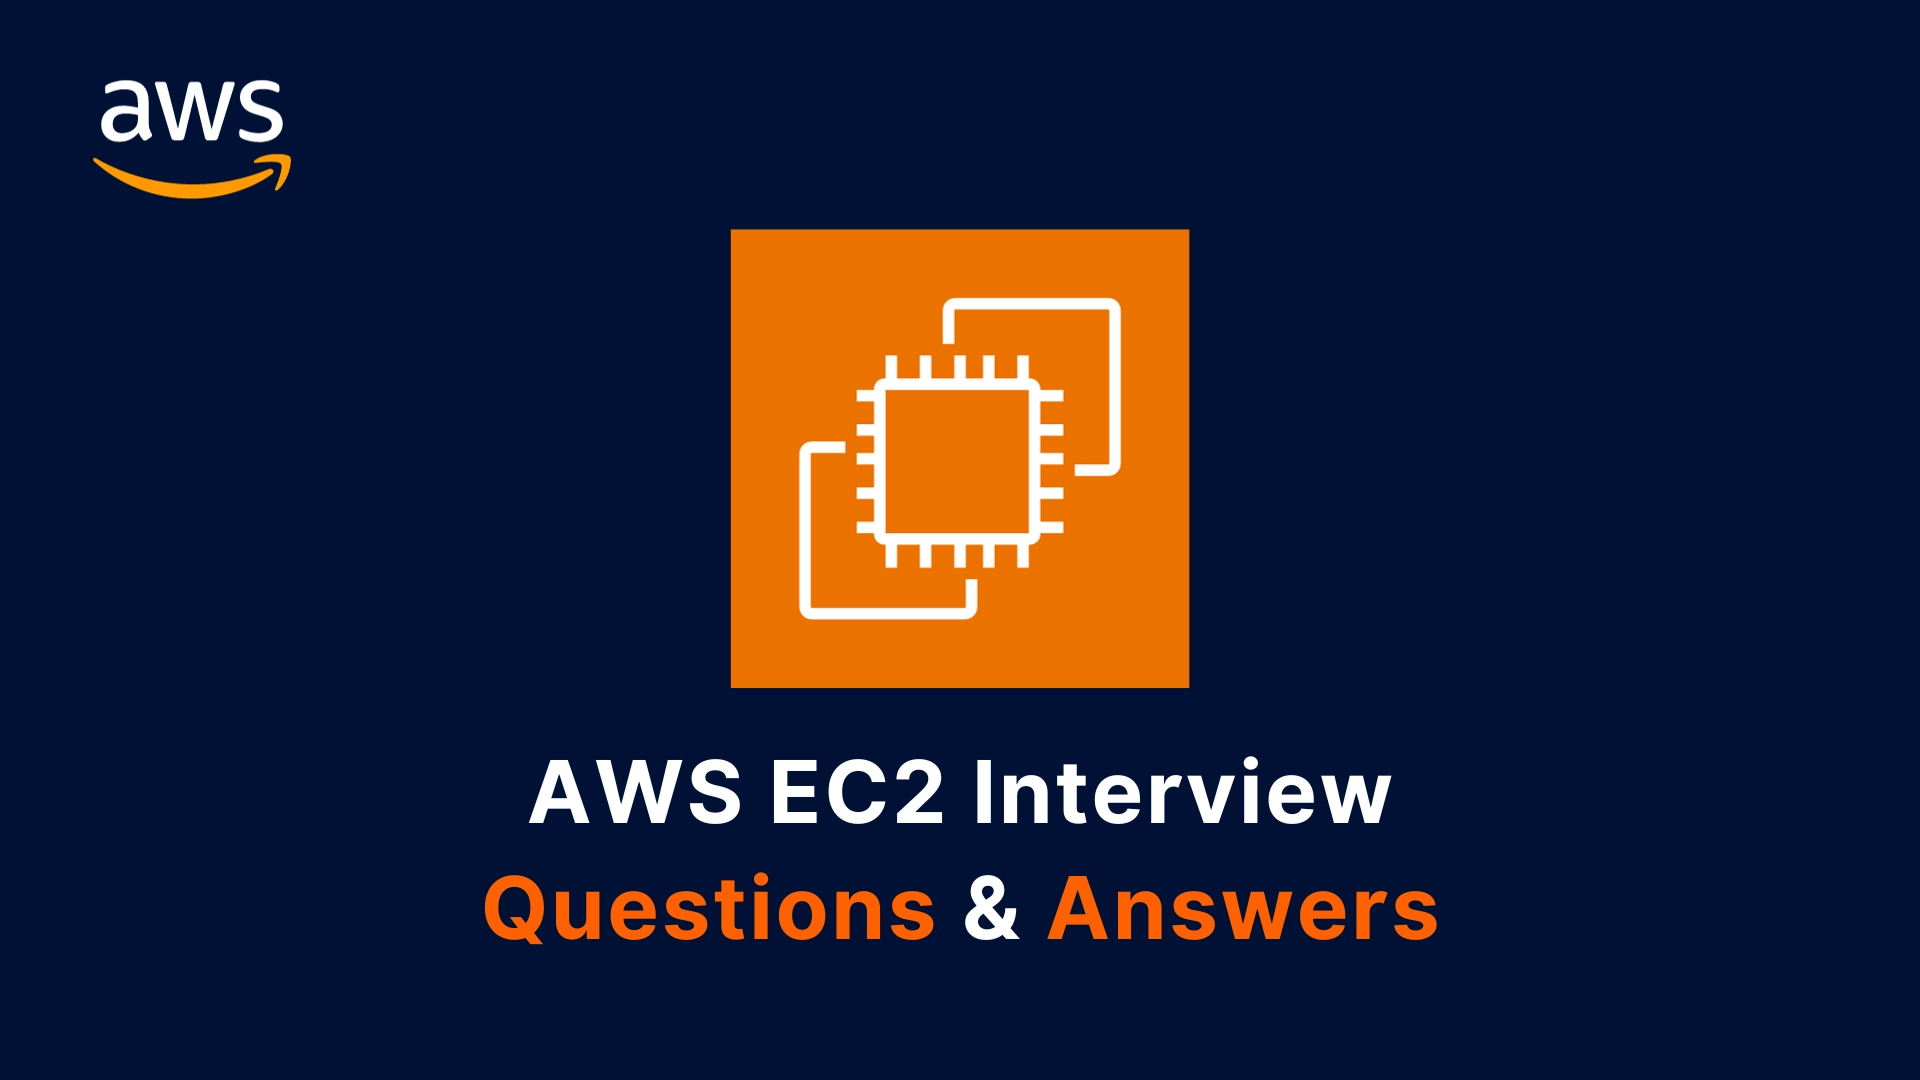 AWS EC2 Interview Questions and Answers